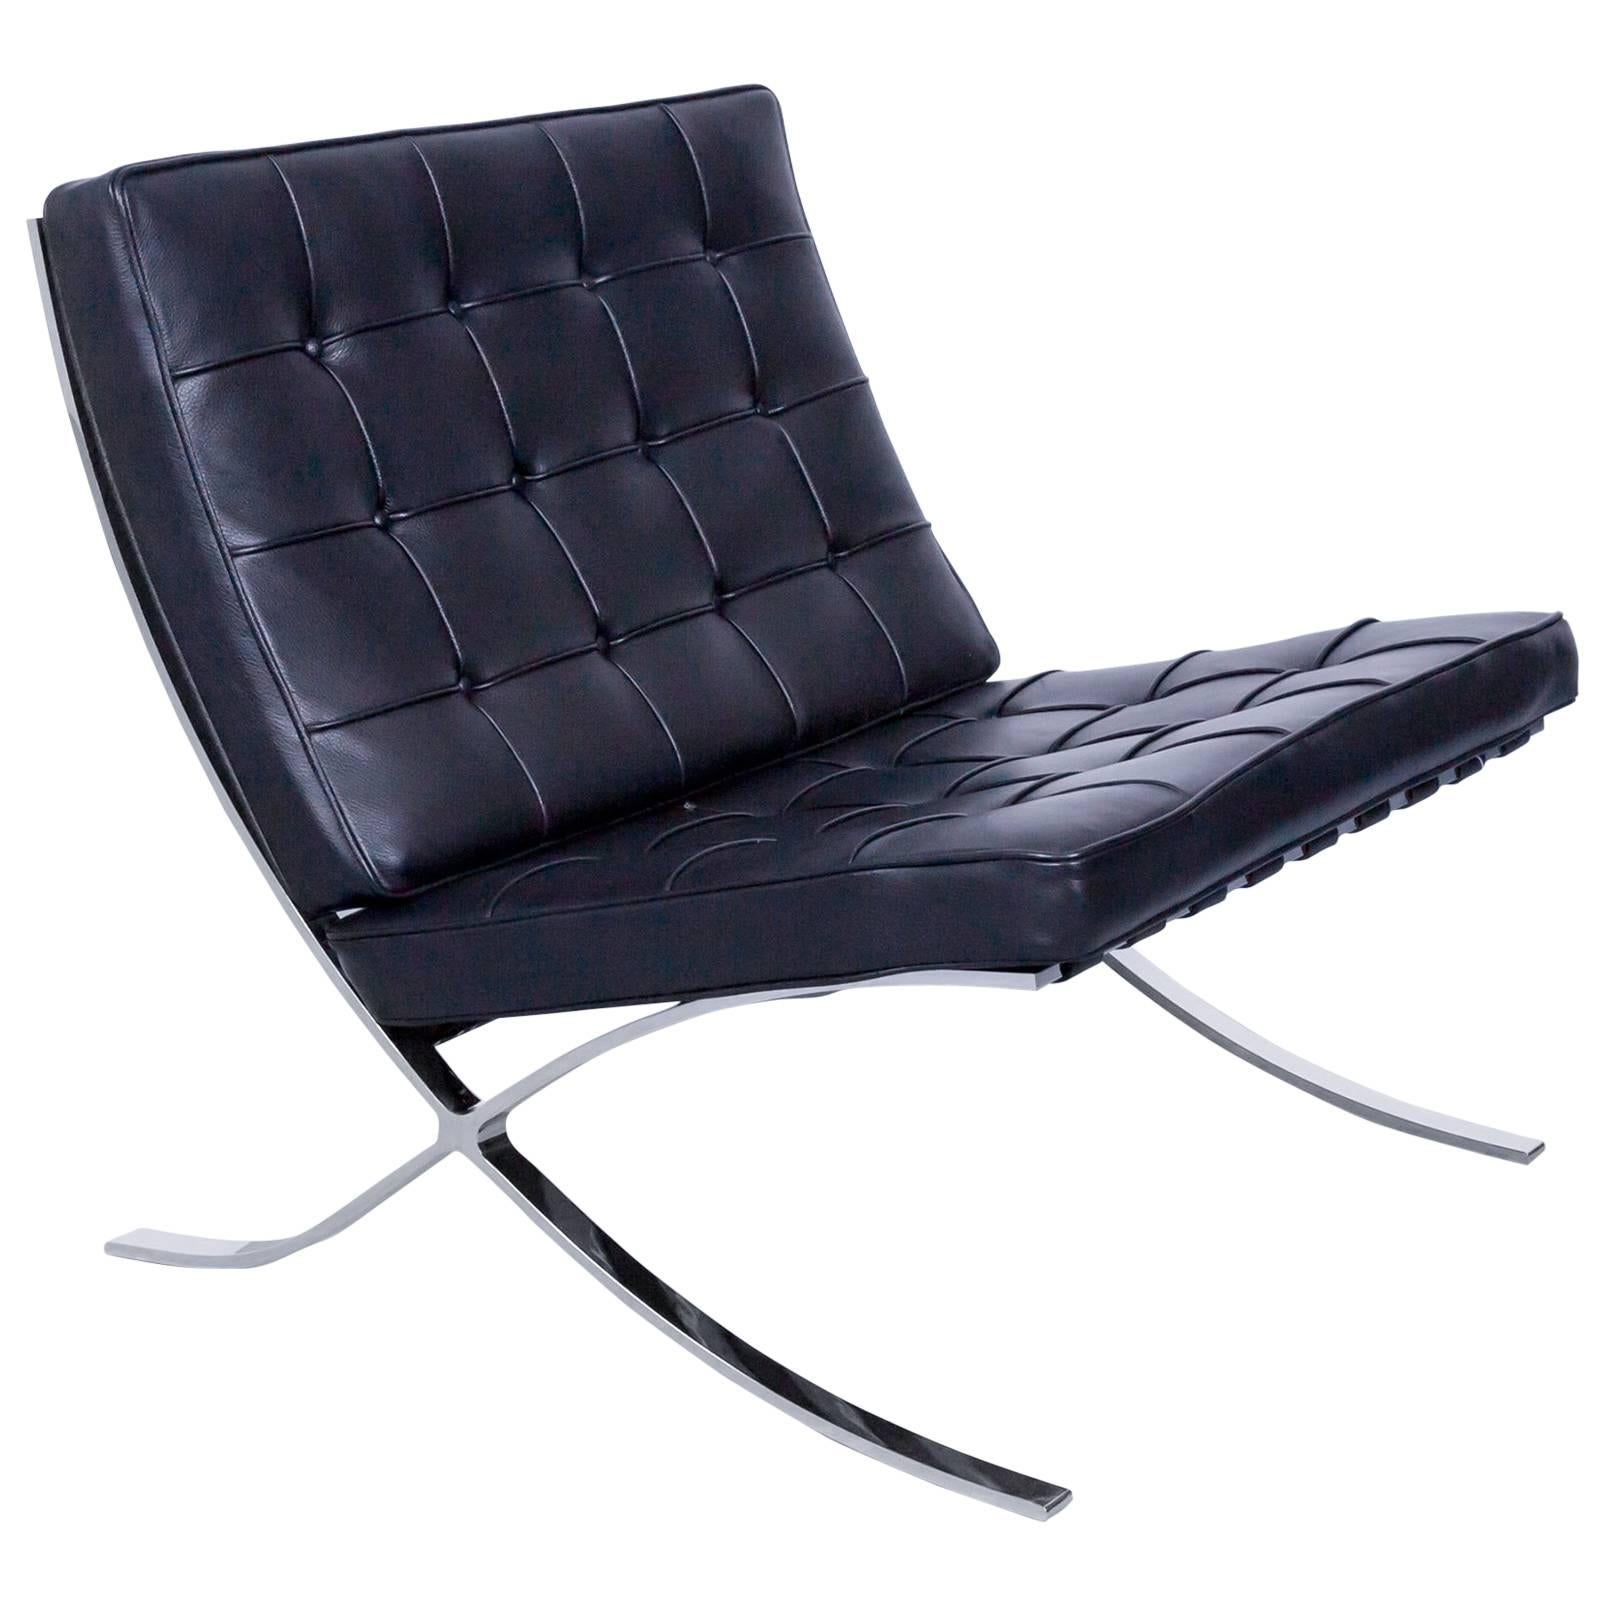 Knoll International Barcelona Chair by Ludwig Mies van der Rohe Black Leather